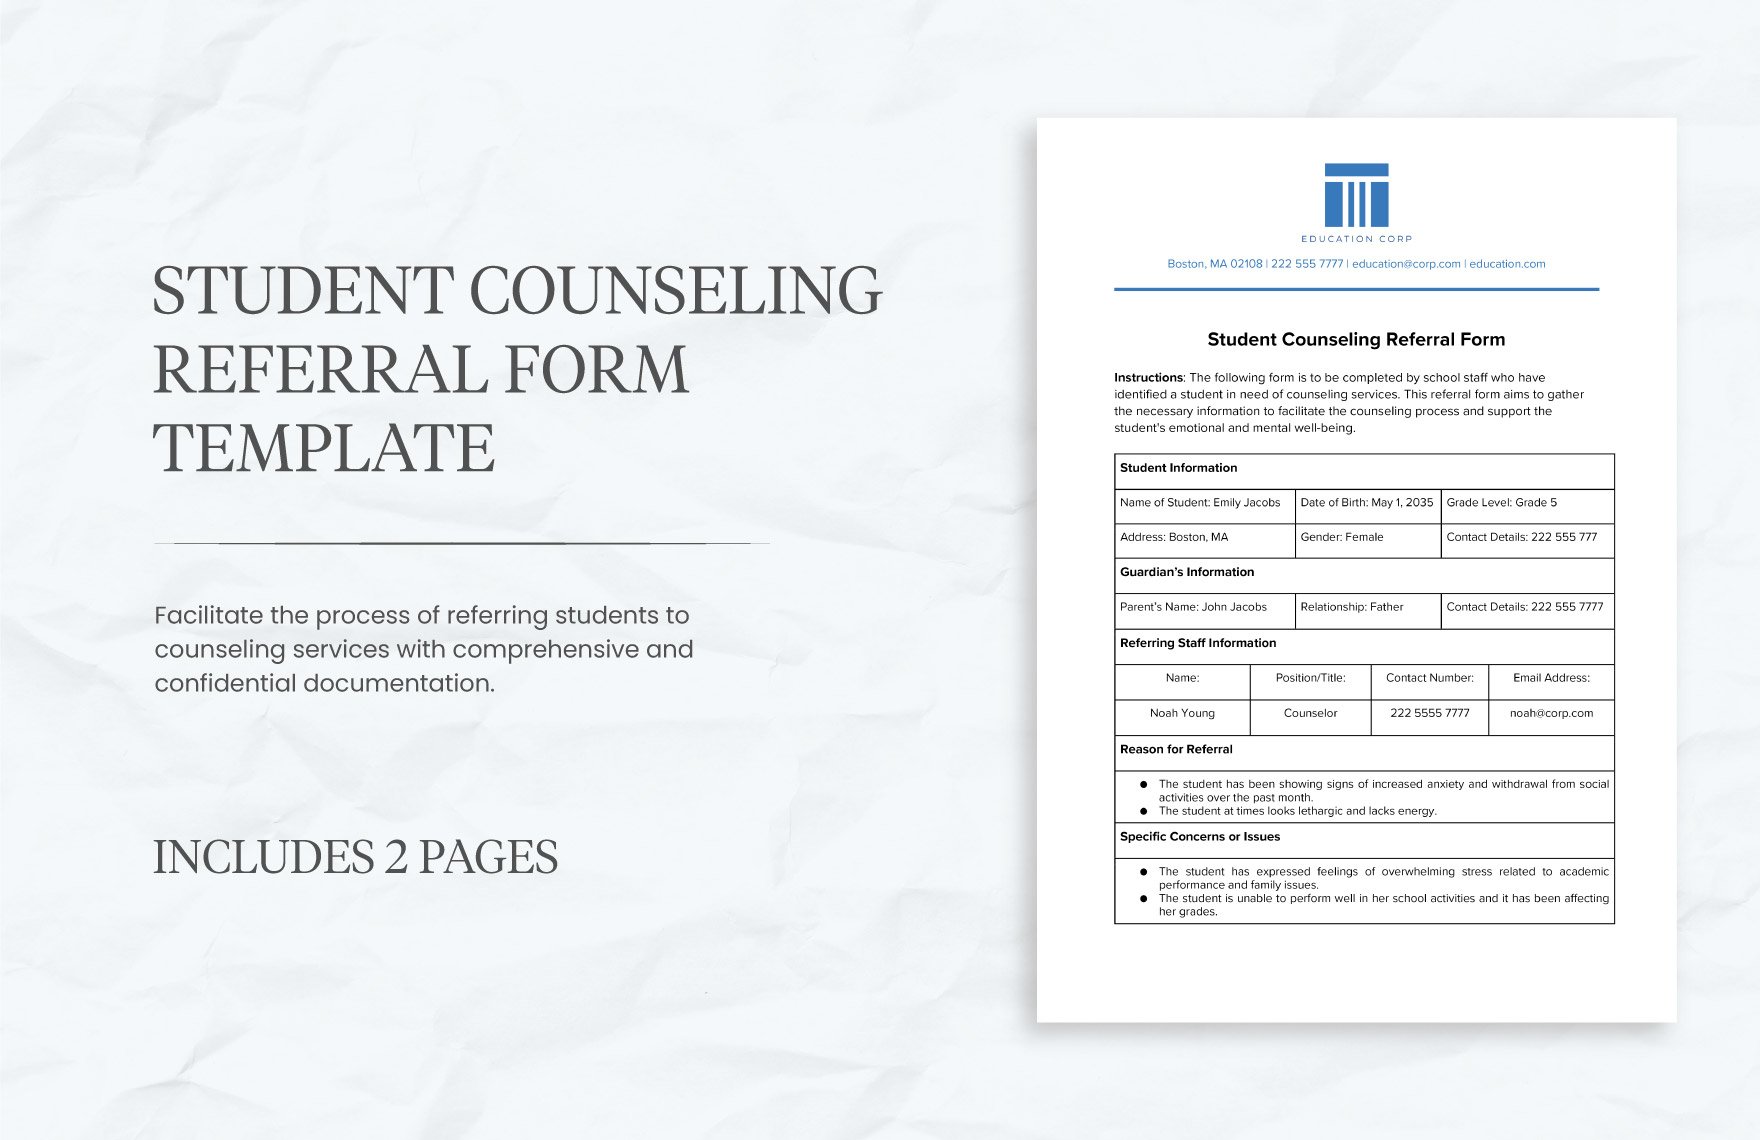 Student Counseling Referral Form Template